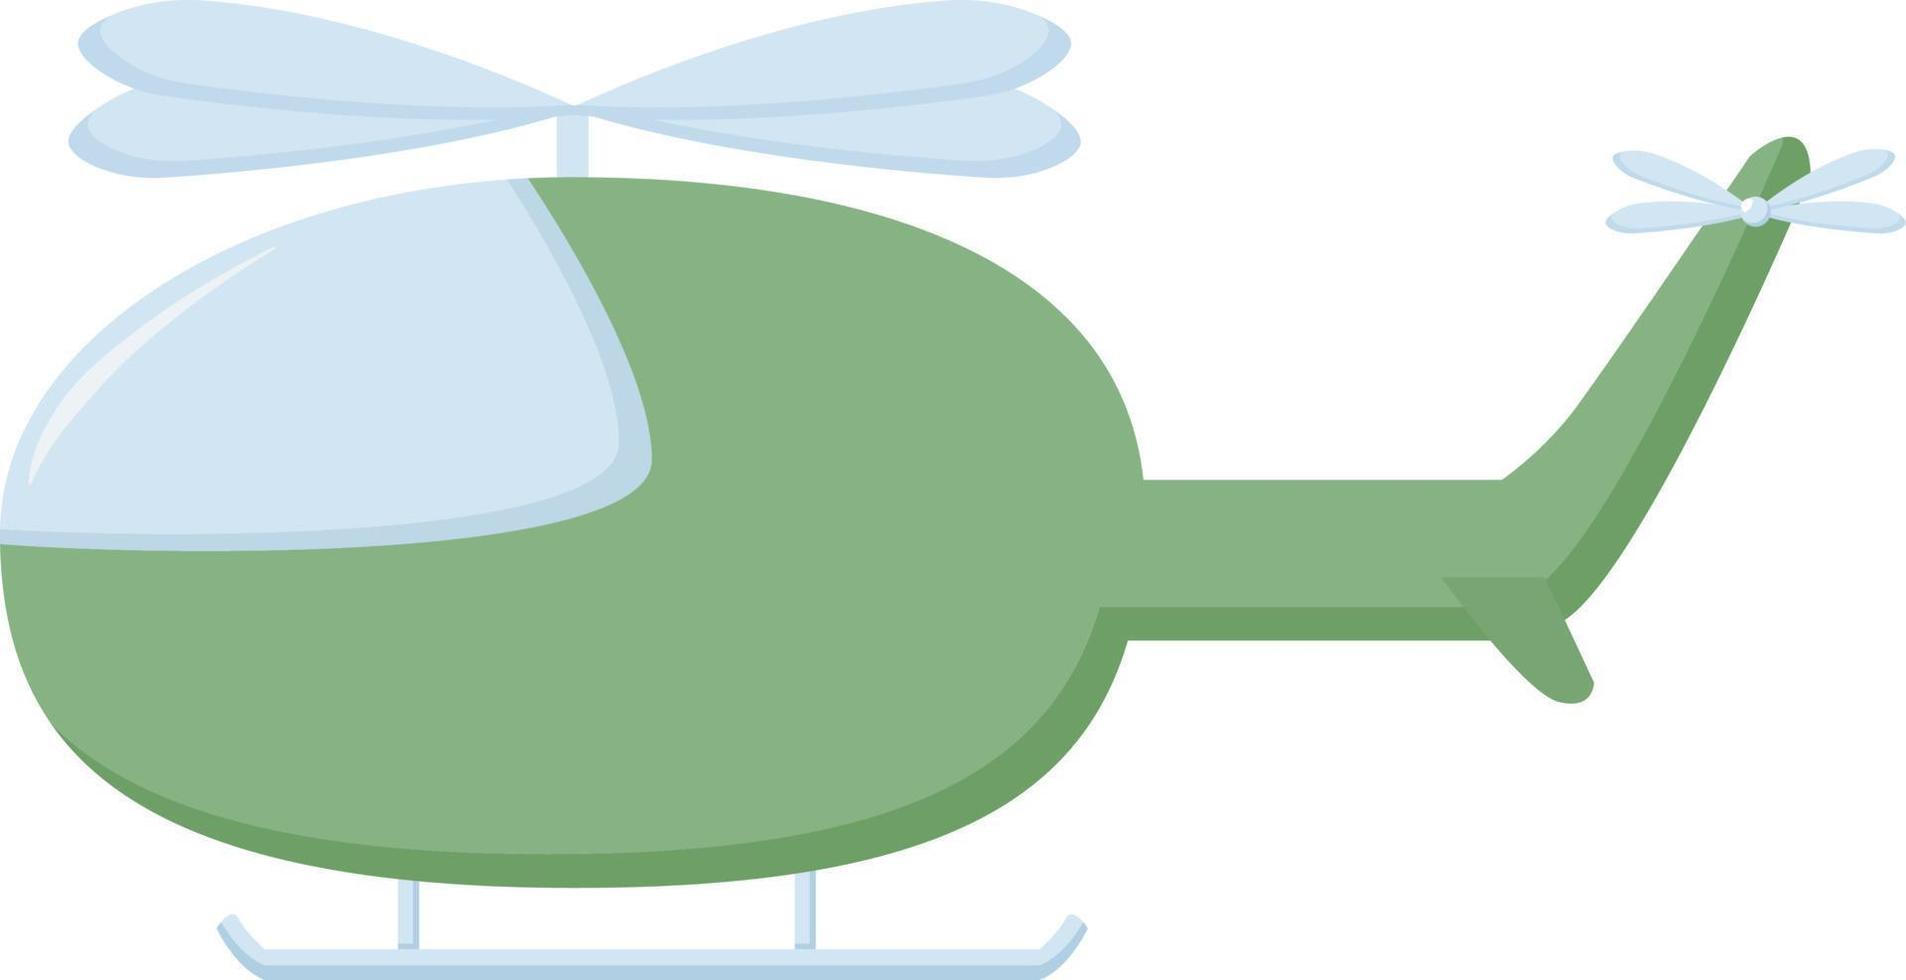 Green helicopter, illustration, vector on white background.